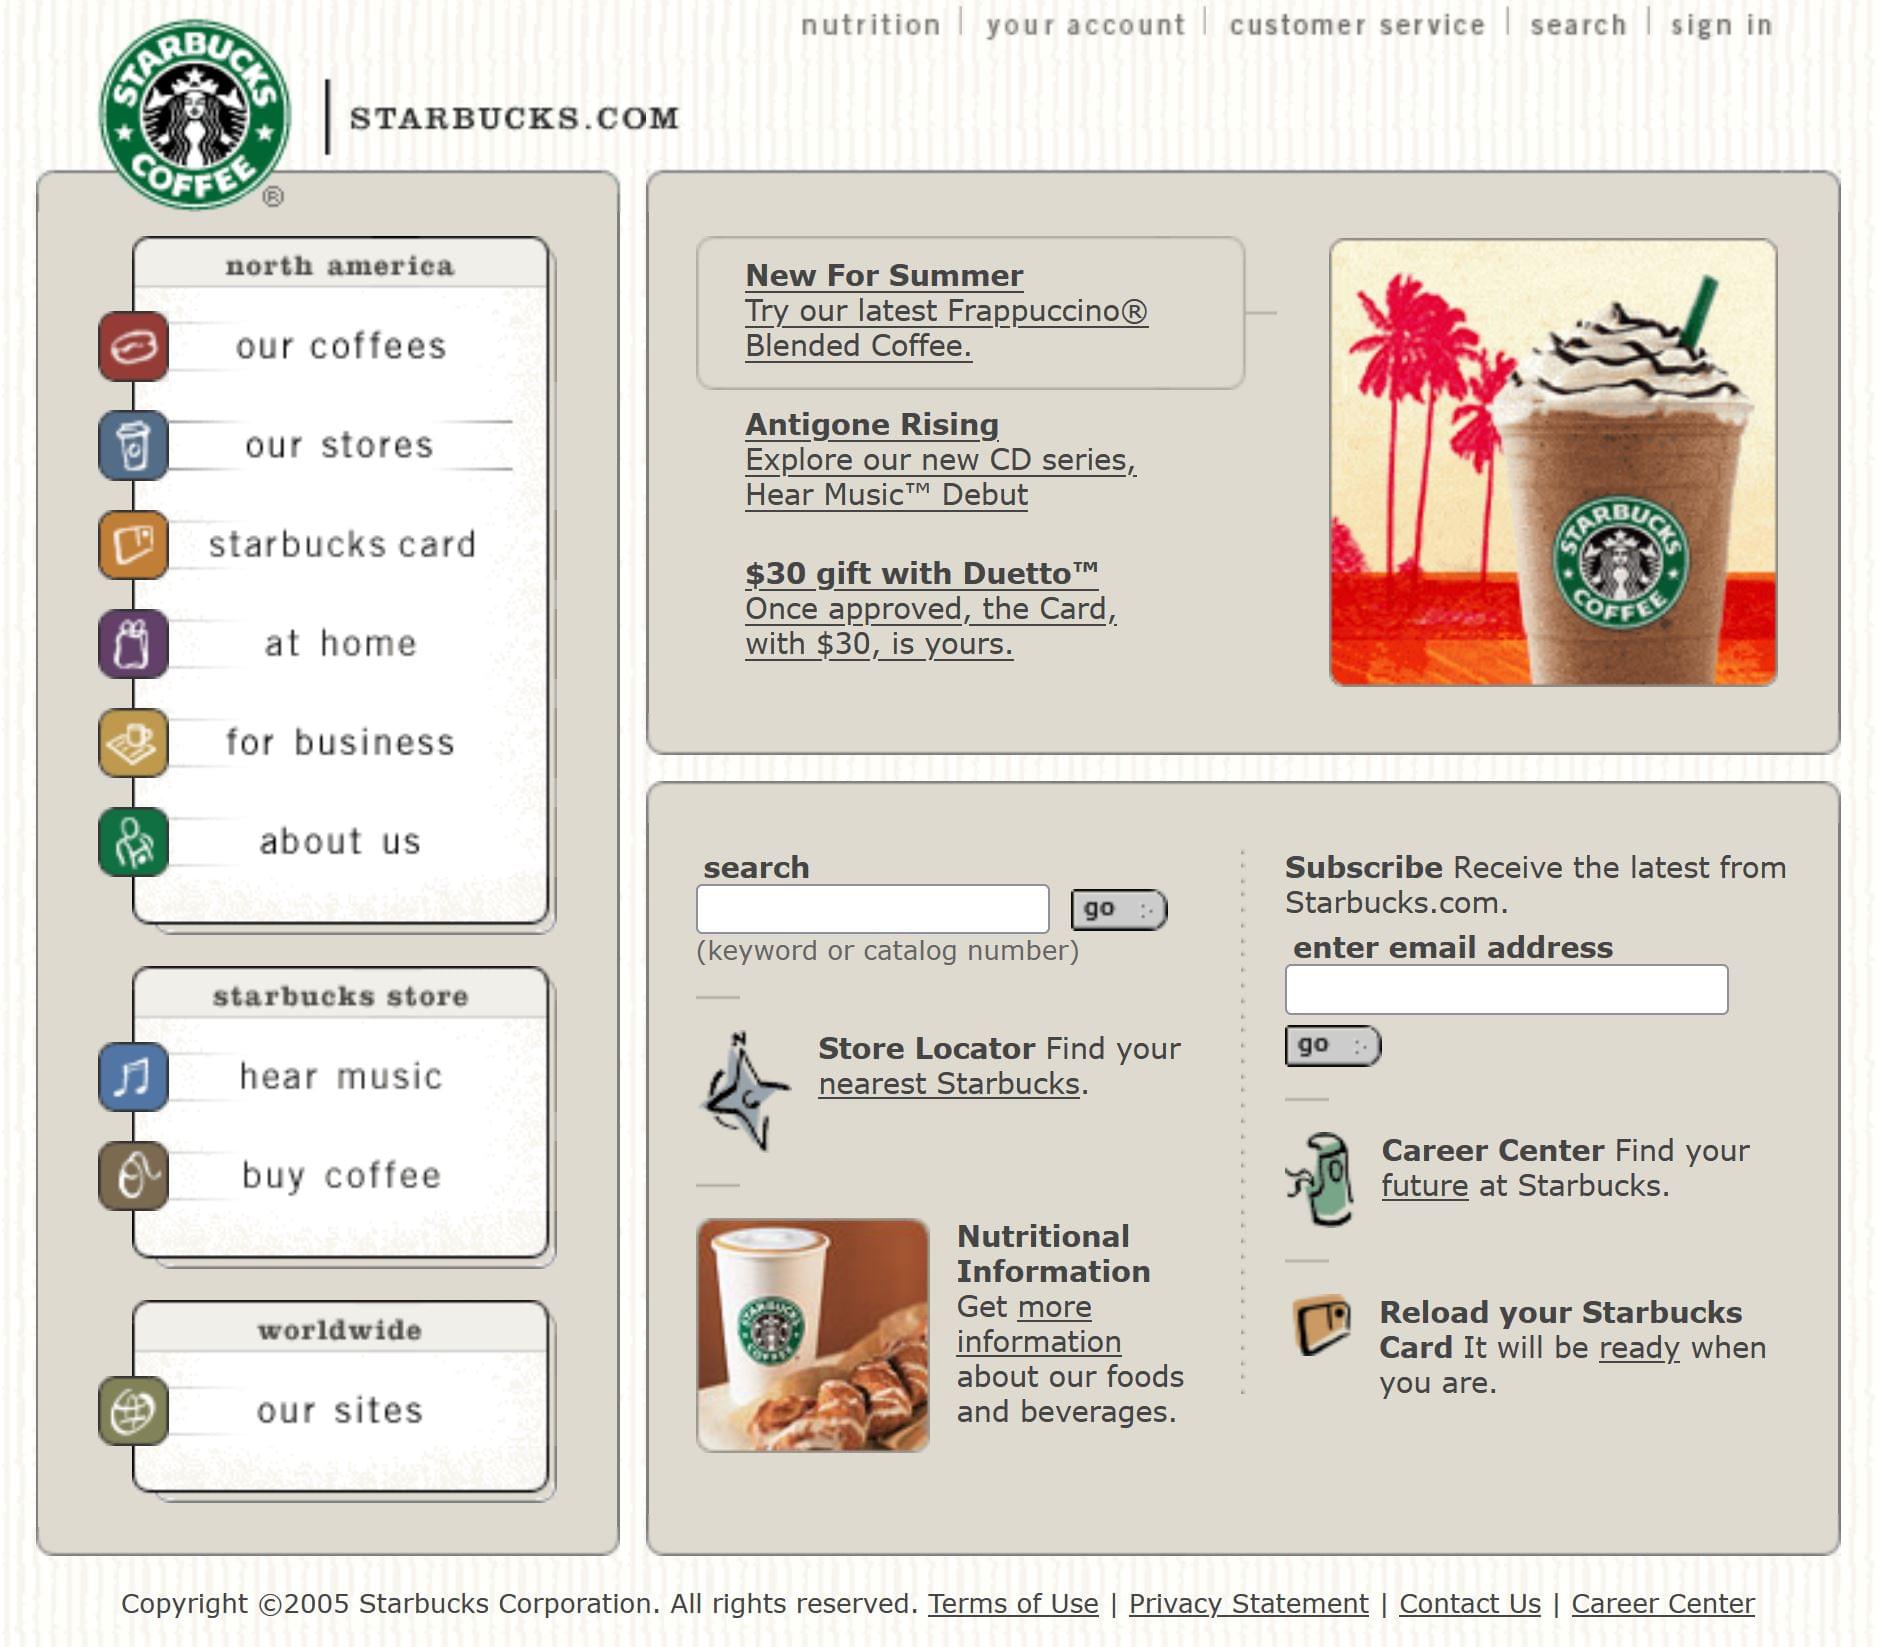 The Starbucks website landing page from 2005